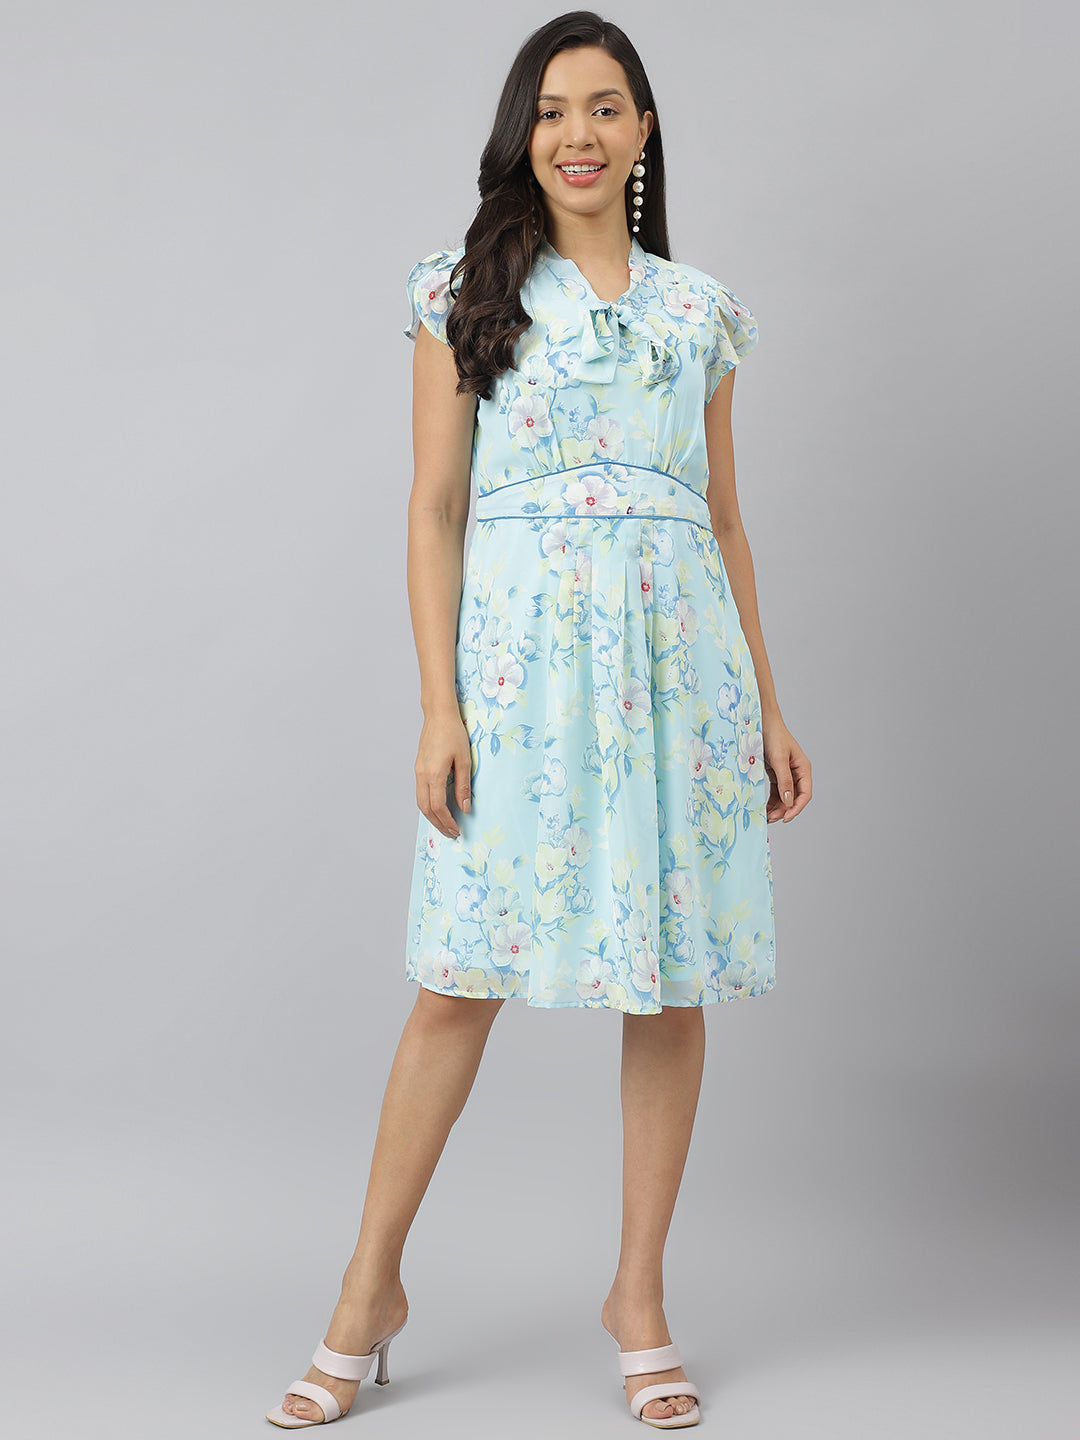 Blue Floral Printed Cap Sleeve With Tie Up Neck A Line Dress